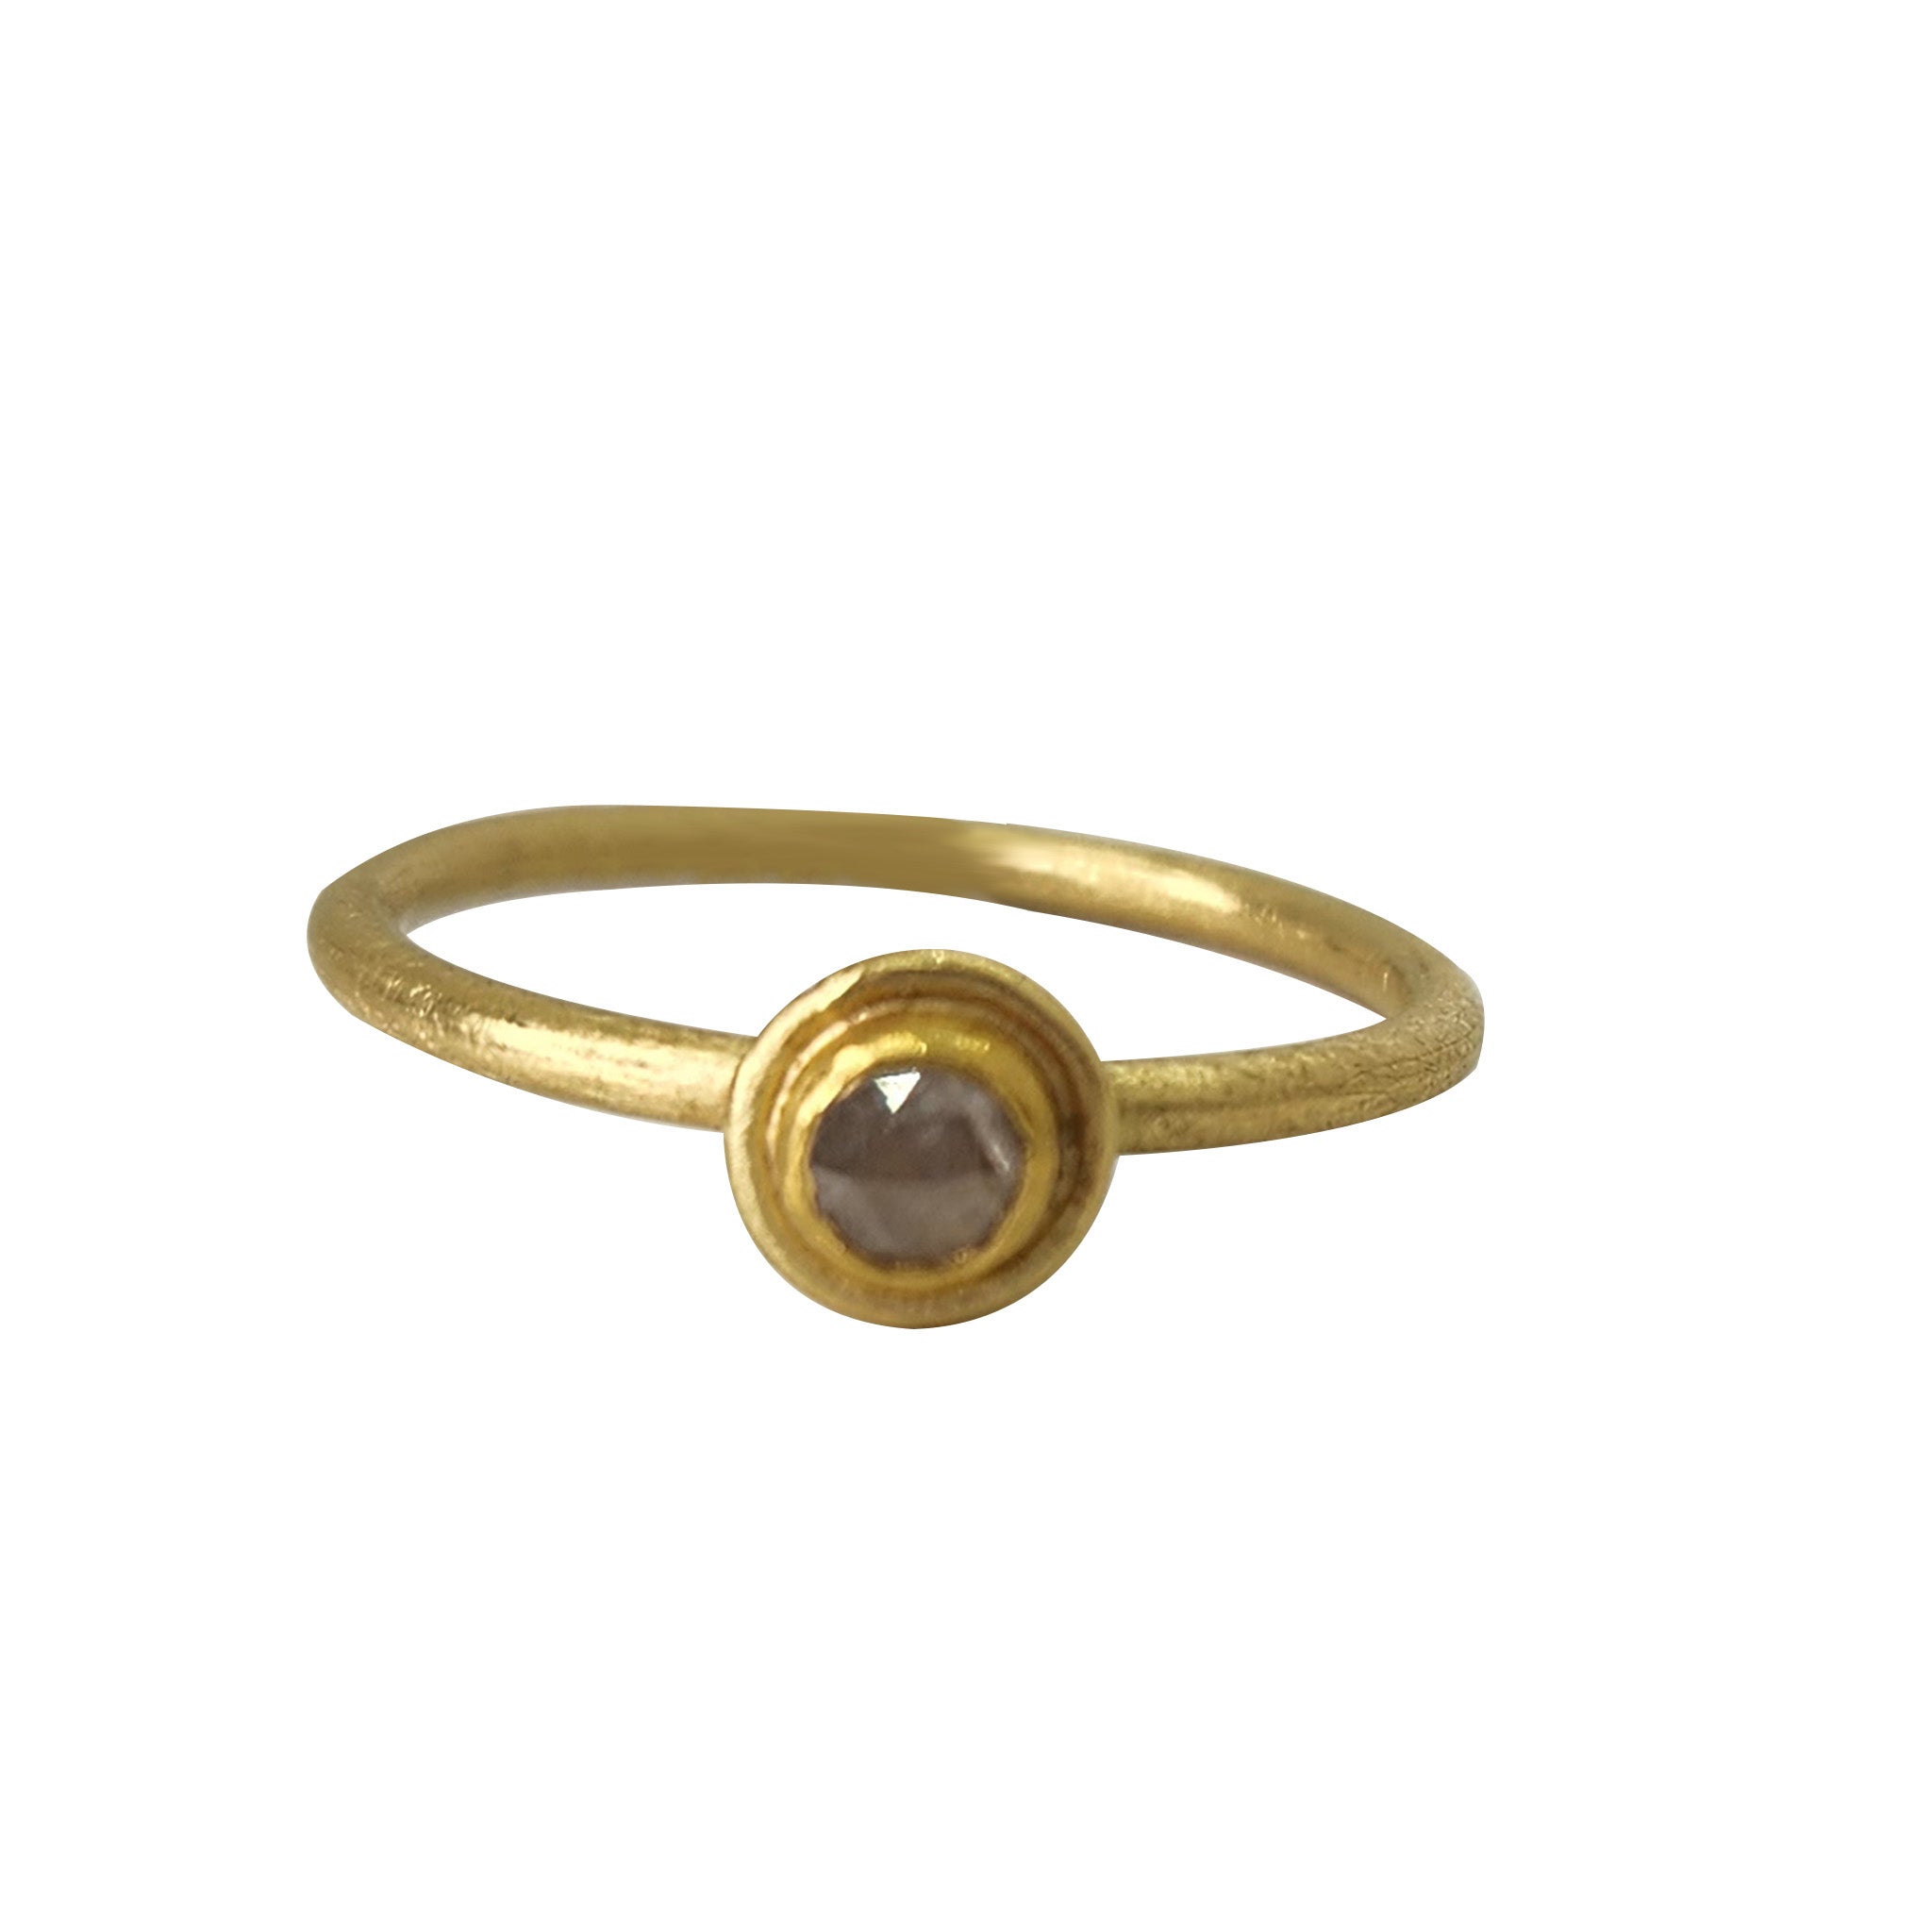 Buy Malabar Gold and Diamonds 18k Gold Heart Ring for Women Online At Best  Price @ Tata CLiQ